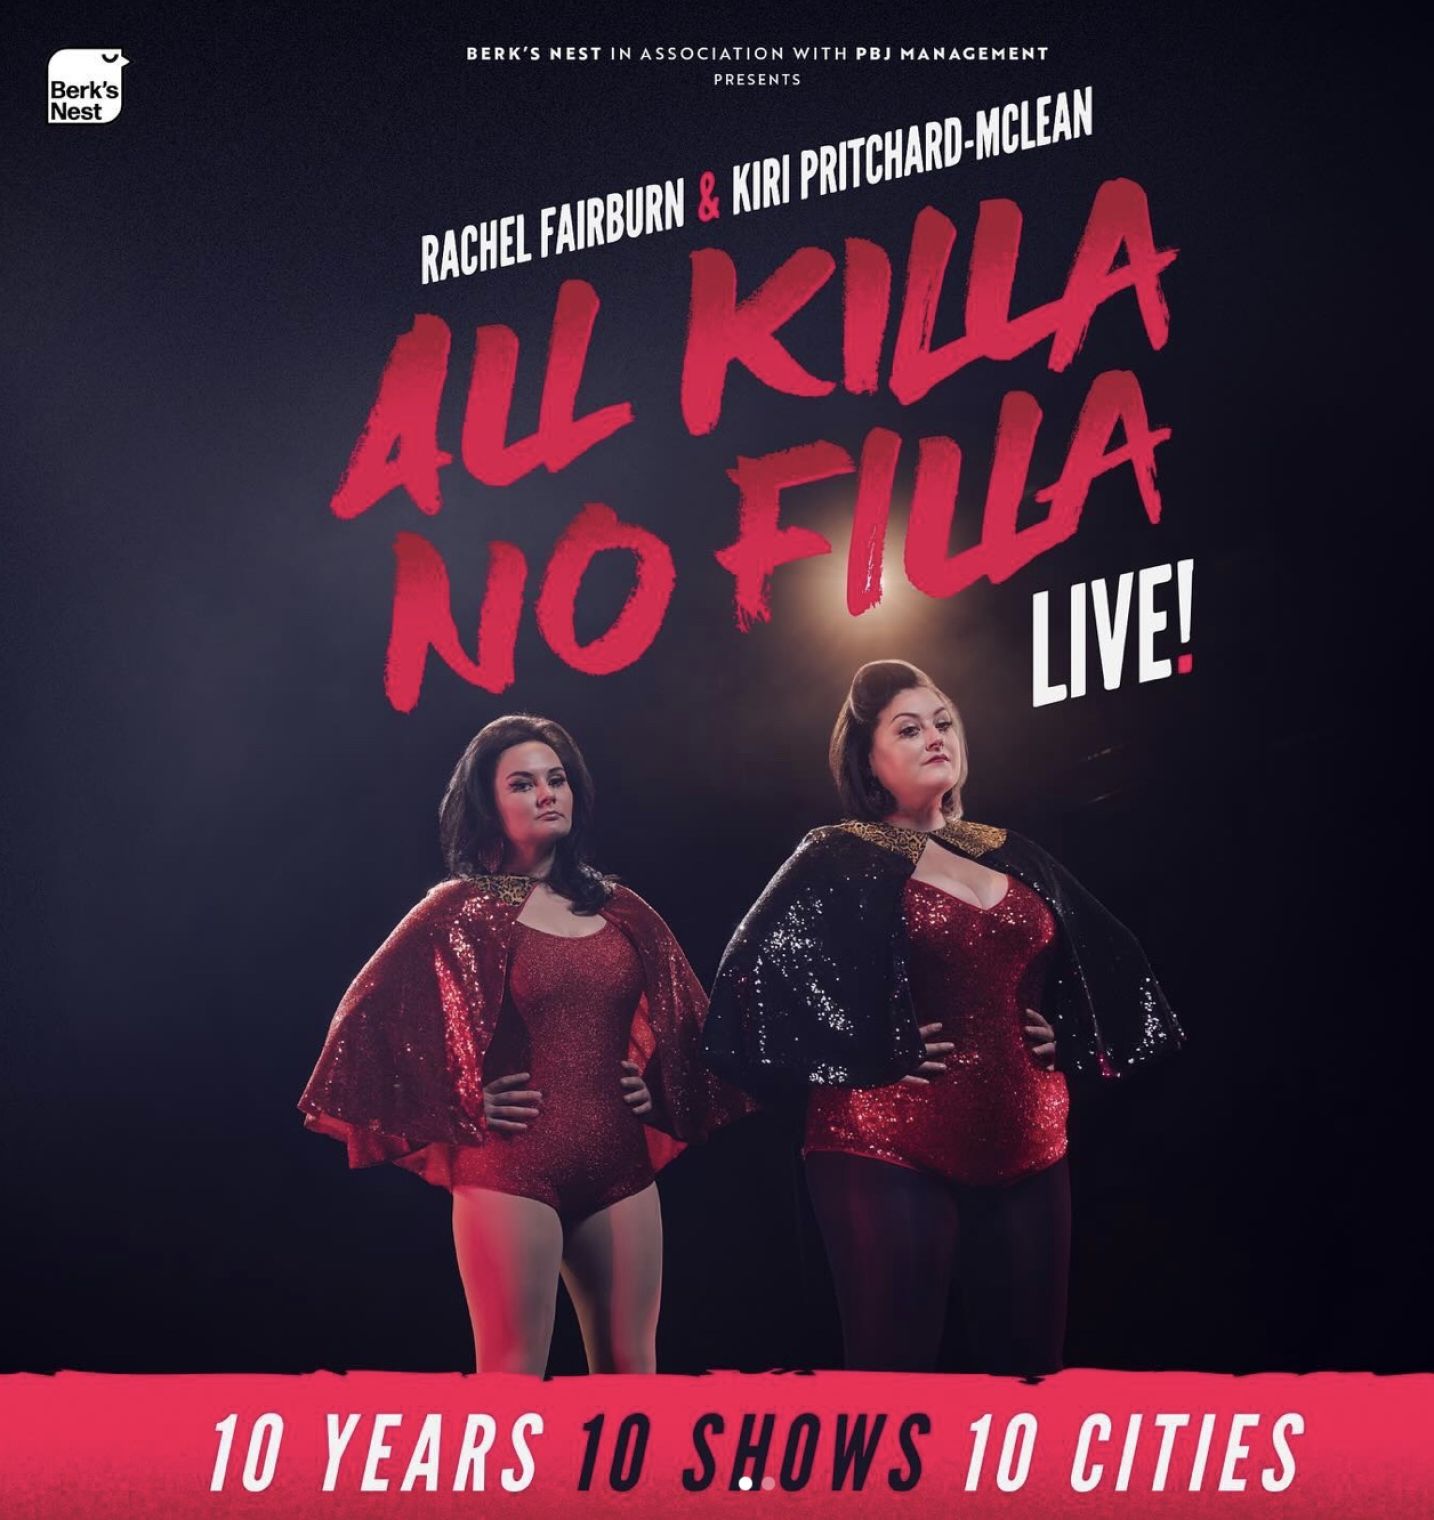  Rachel Fairburn has announced a brand new UK tour of her hit podcast ‘All Killa No Filla’, celebrating 10 years of the show